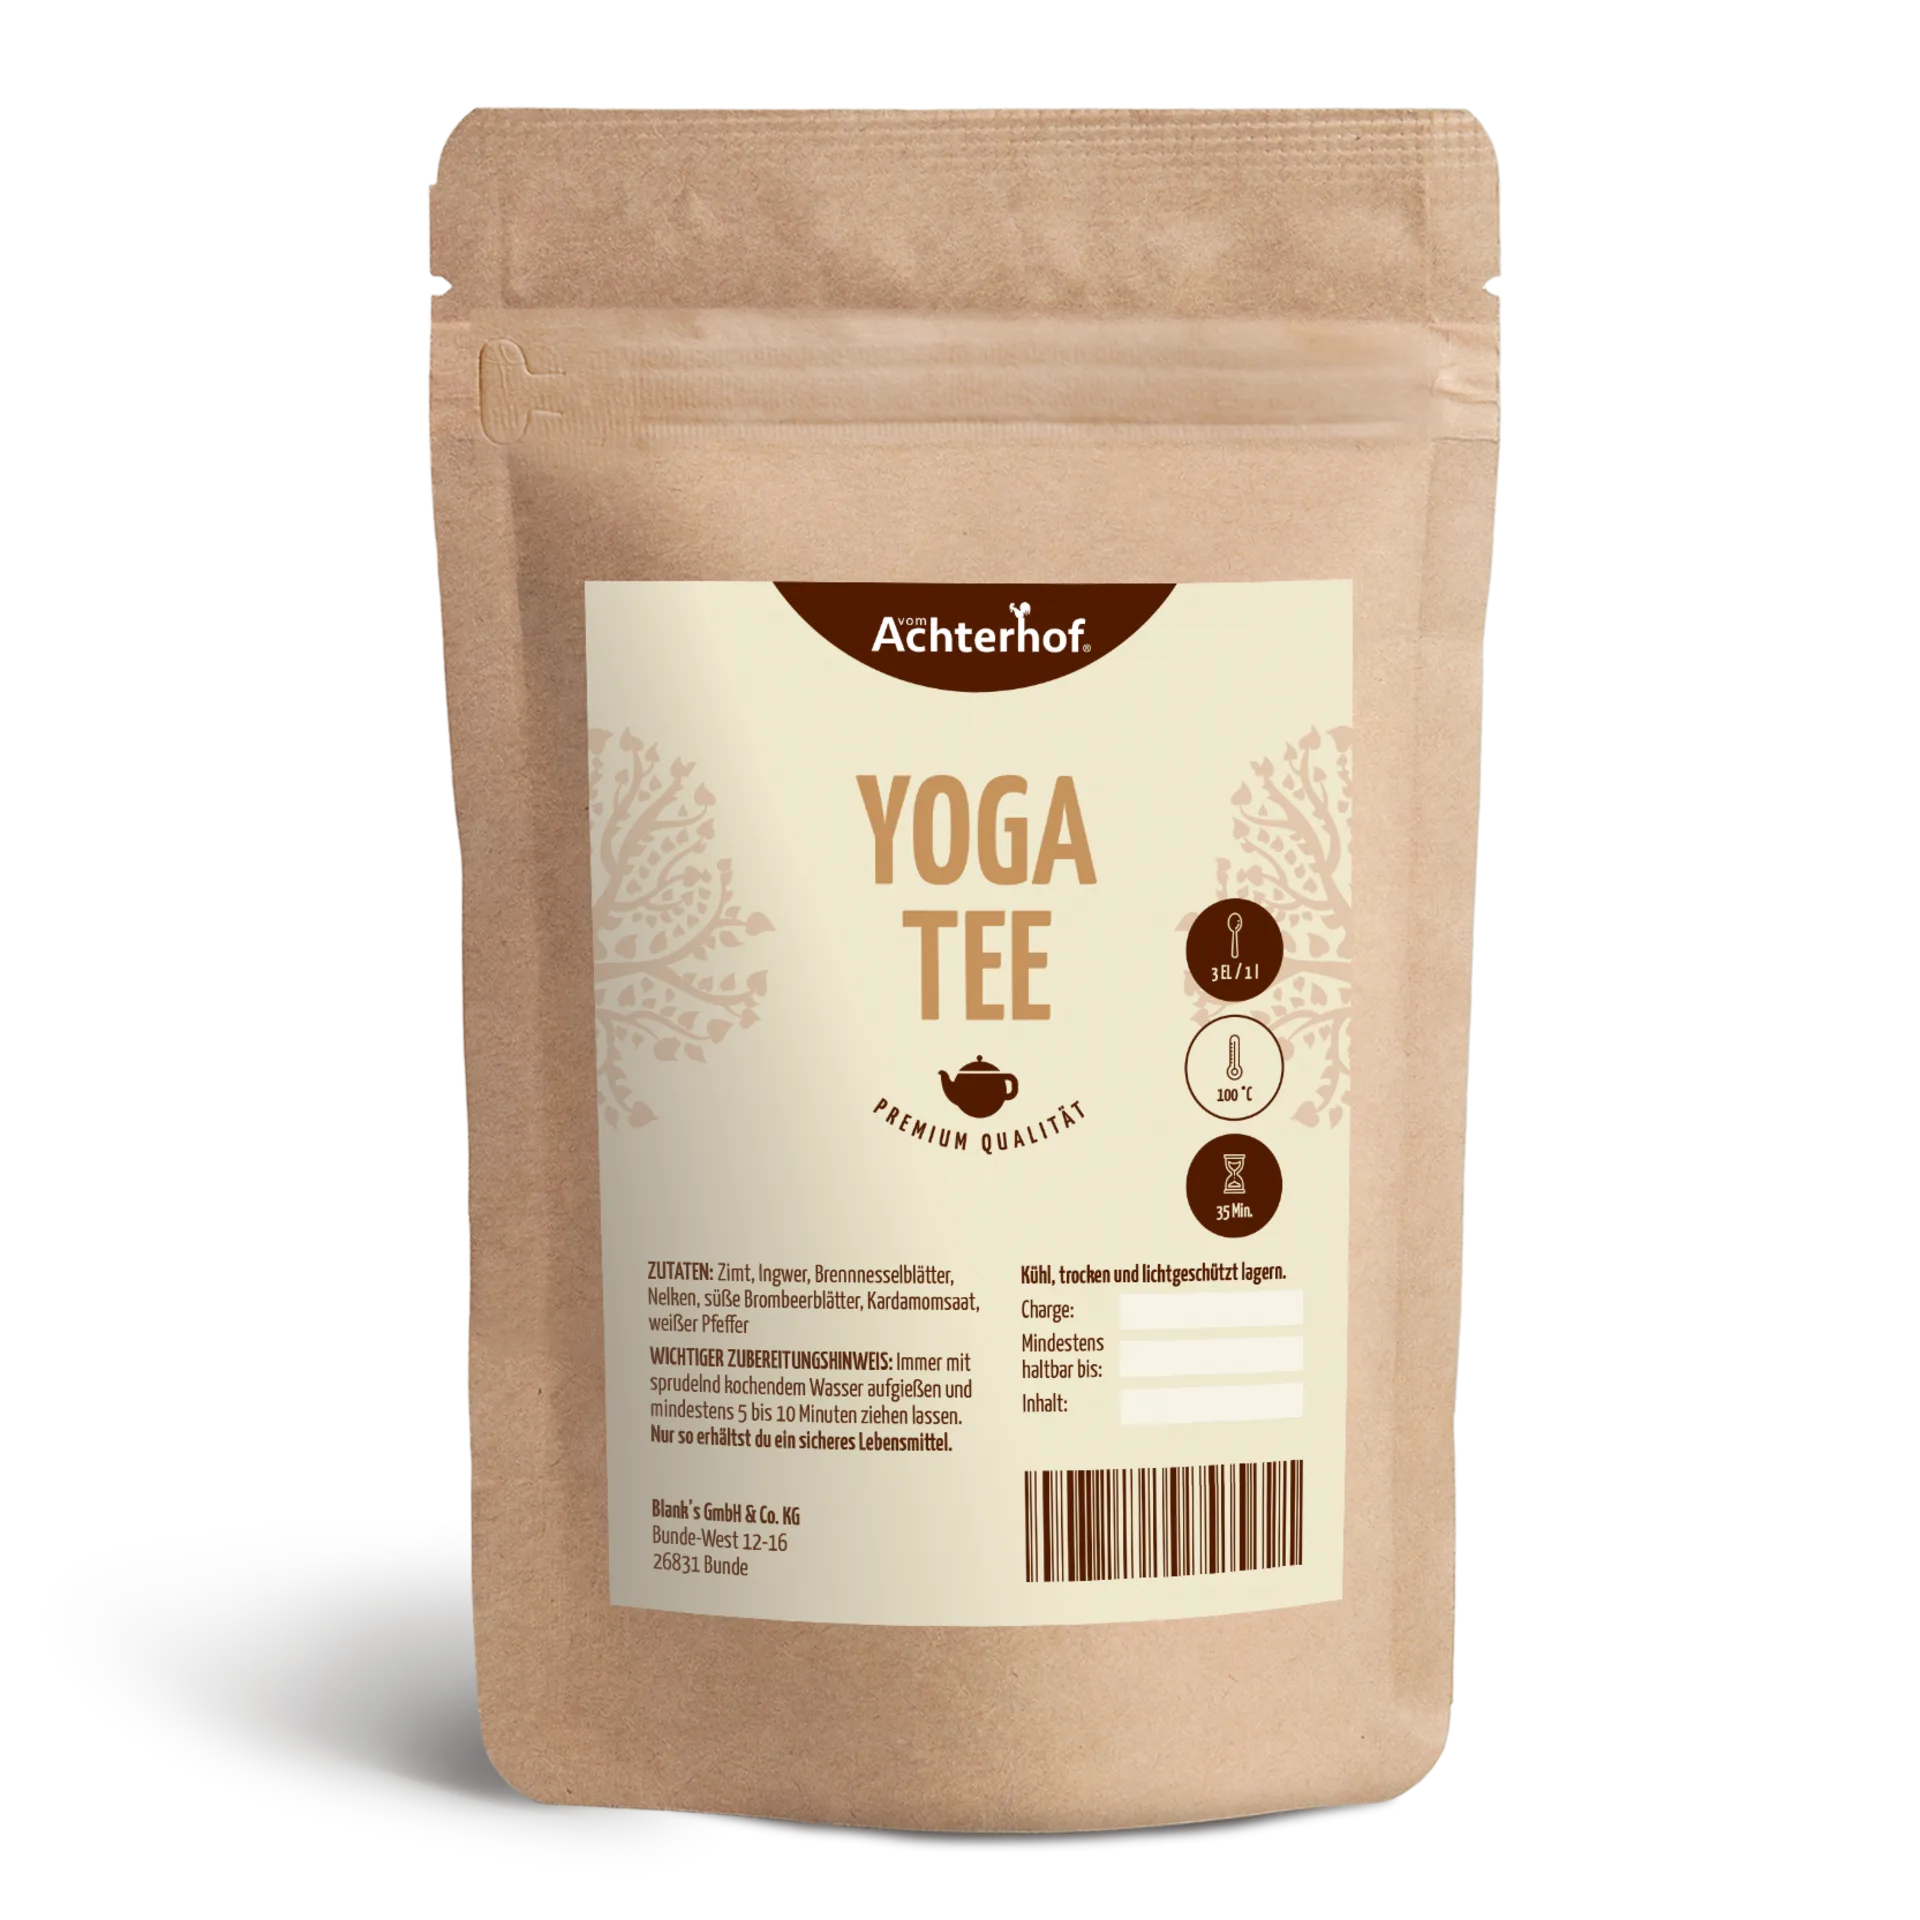 Yoga Tee (100g) depicted